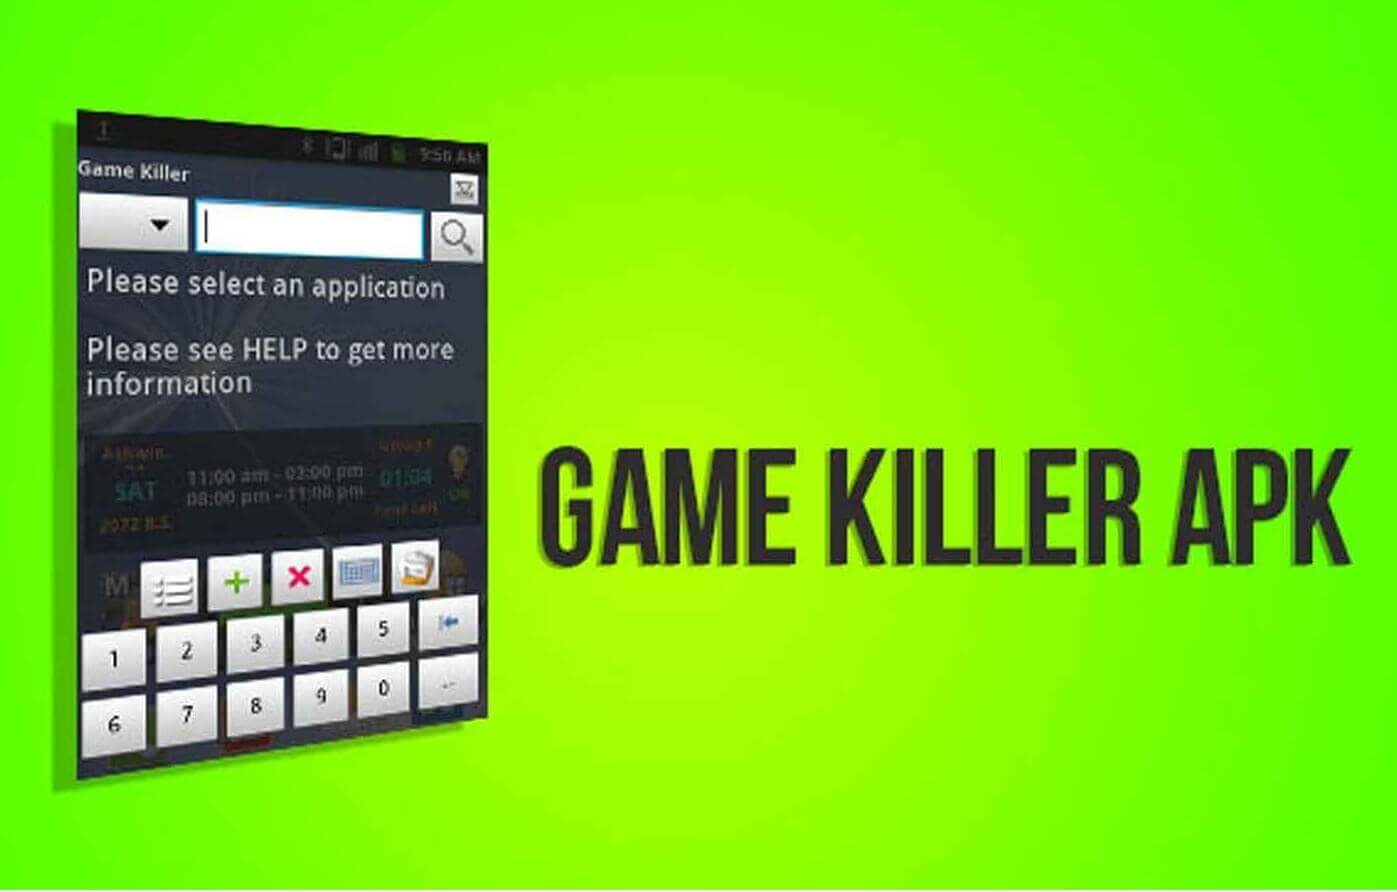 How To Download Game Killer Apk?